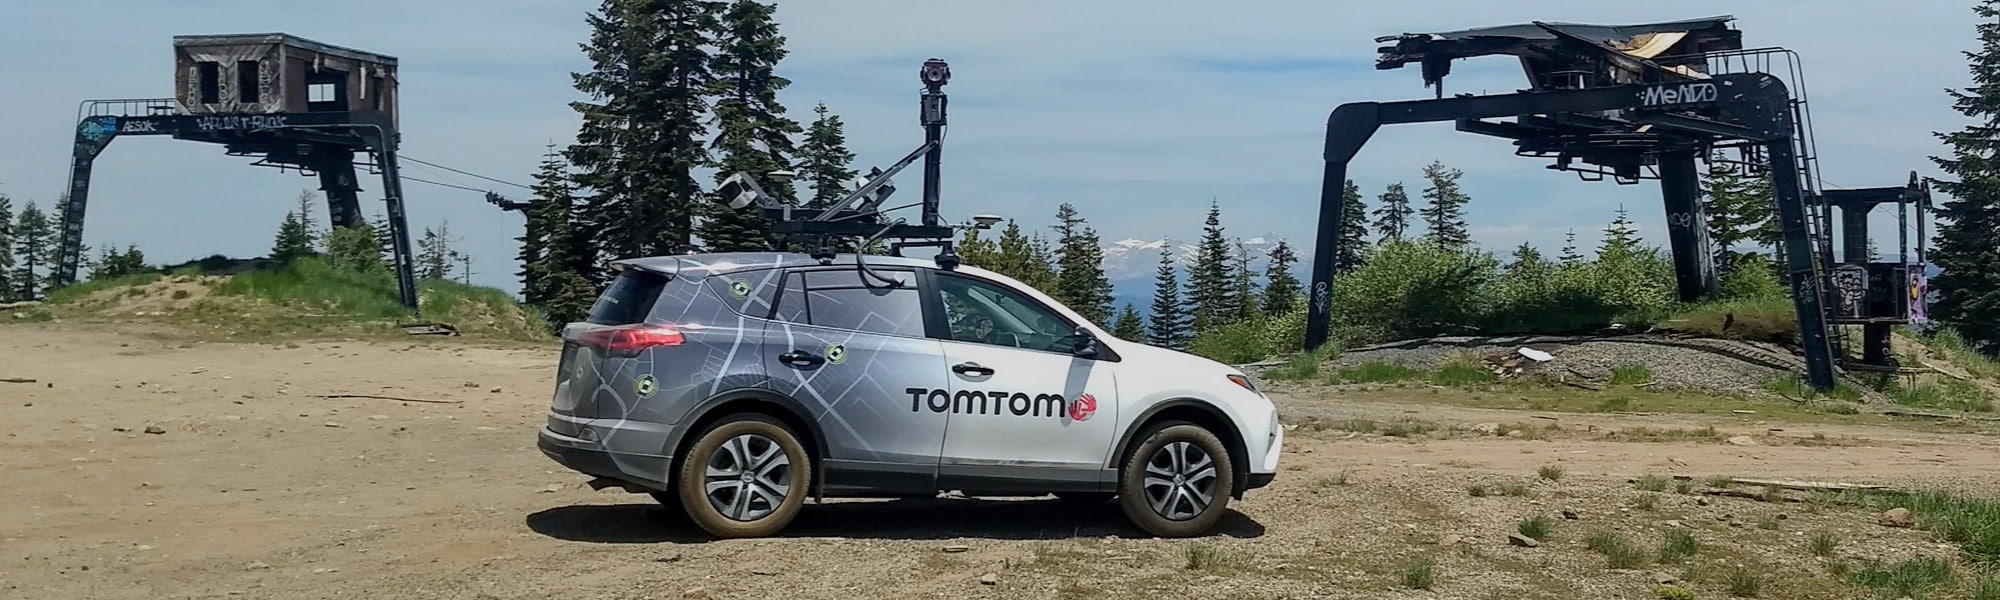 Keeping maps fresh: The life of a TomTom mapping car driver